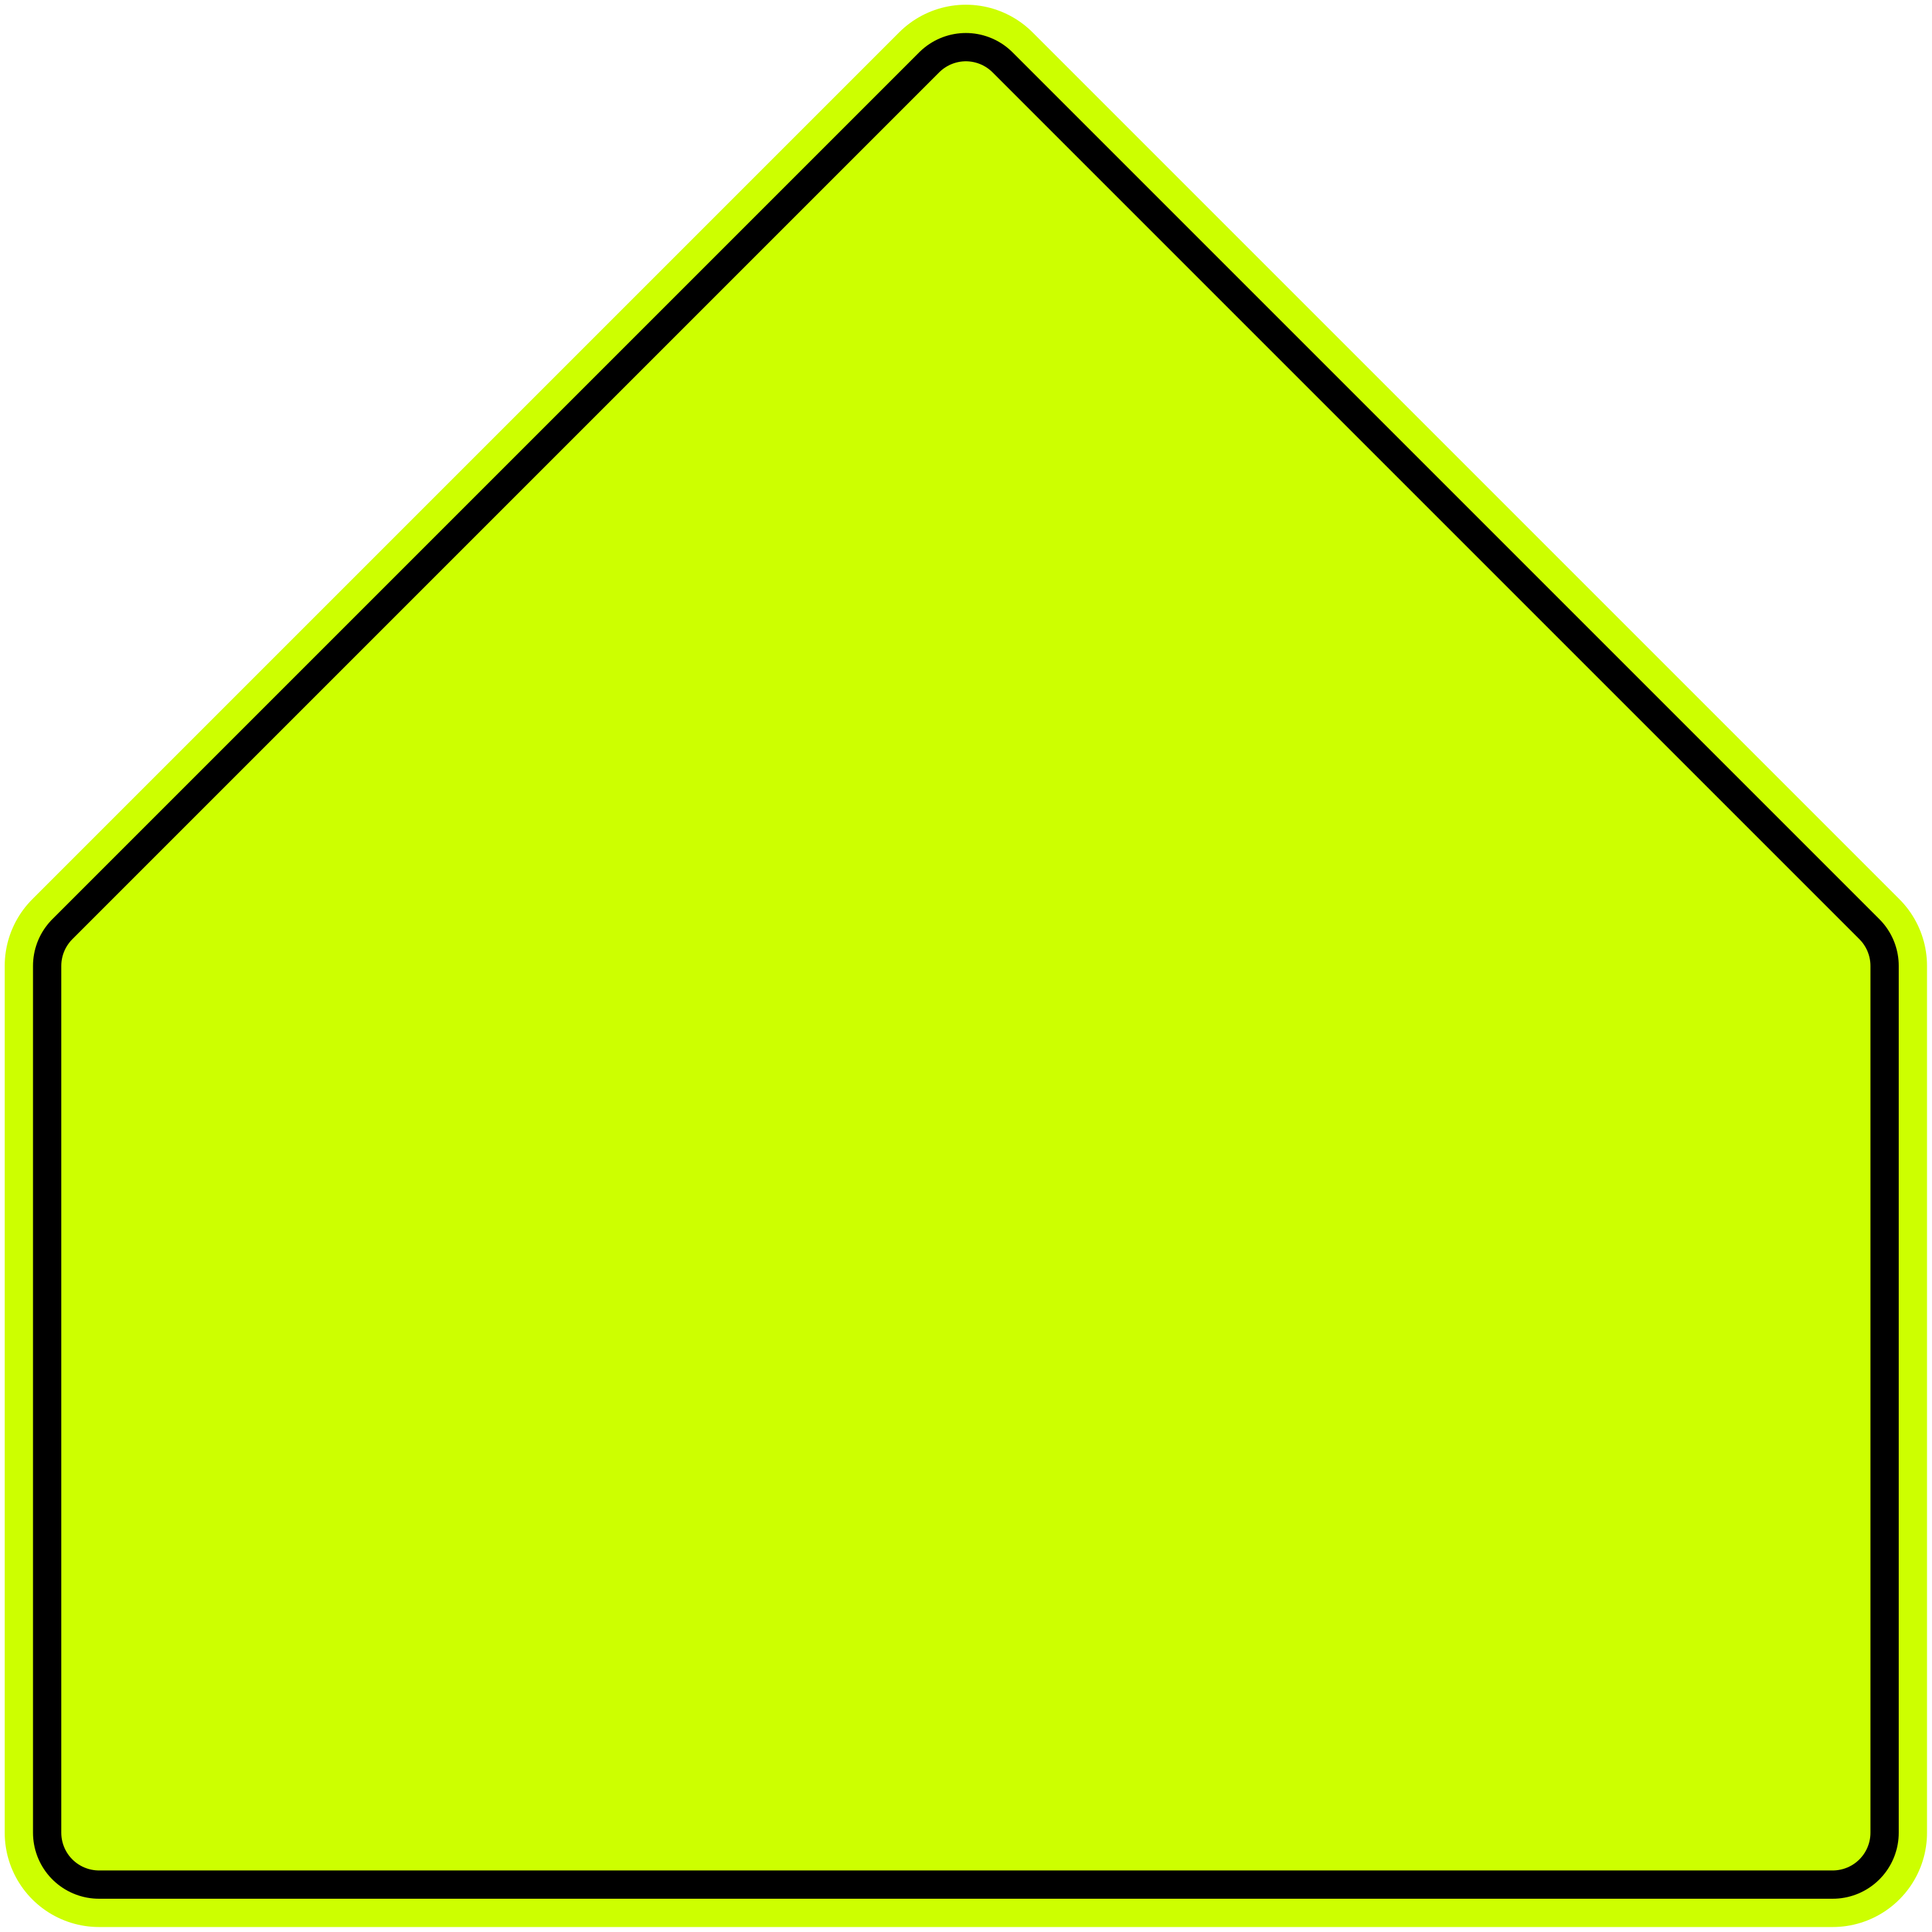 File:Pentagon warning sign (fluorescent green).svg - Wikimedia Commons